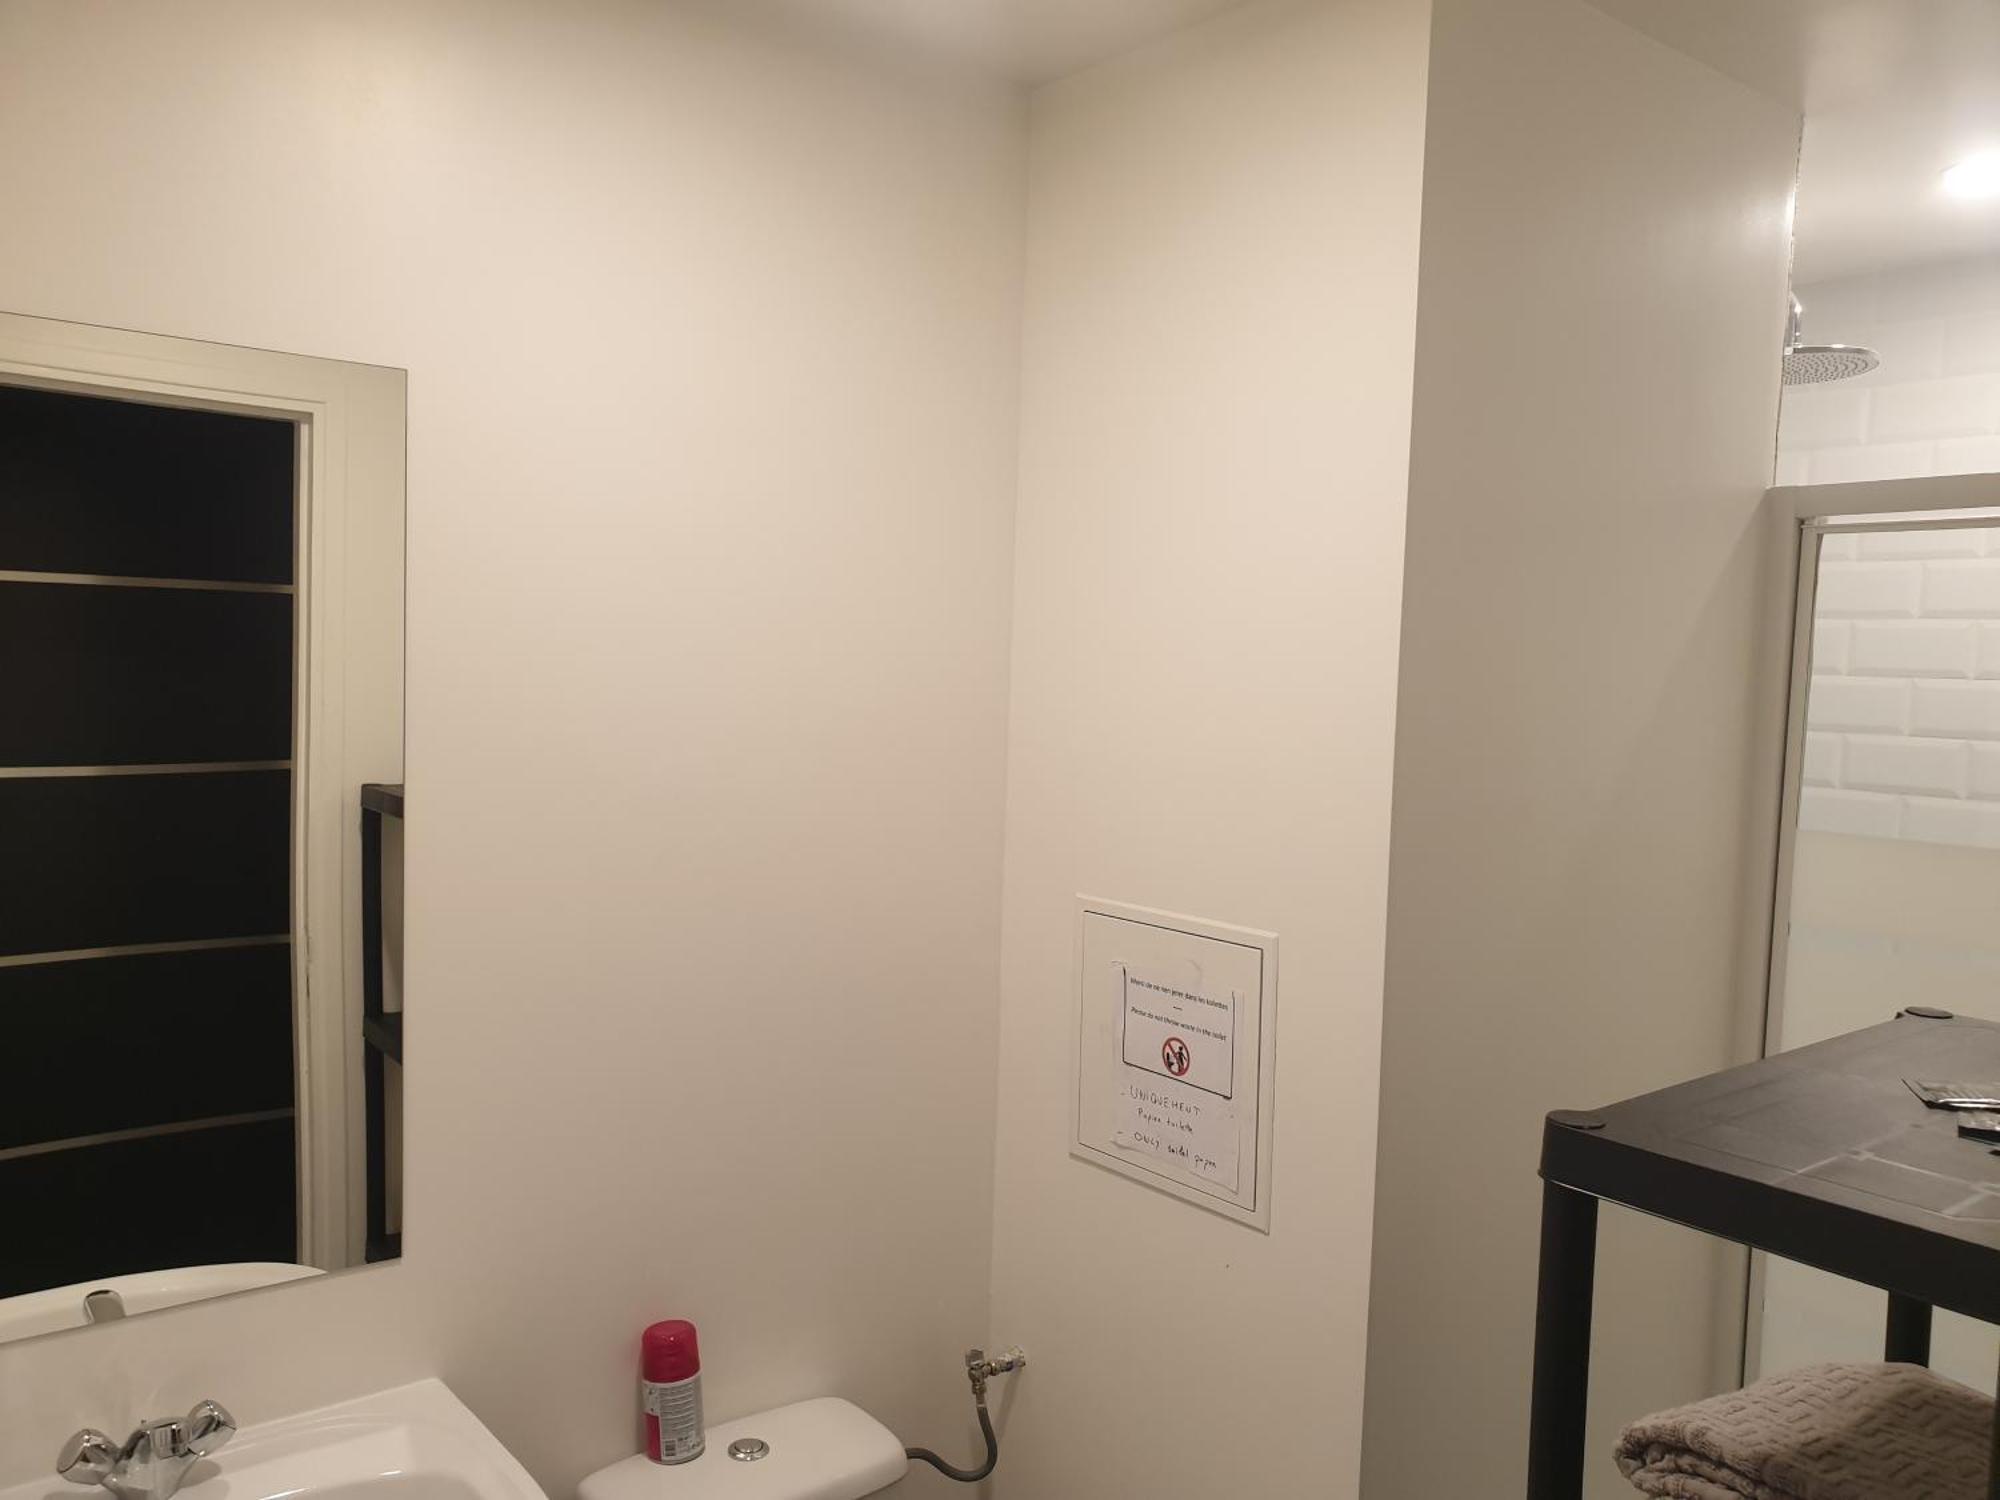 Appartements Renove 2023 Proche Aeroport 5Min, Gare Sncf 2 Min, Tramway Au Pied De L'Immeuble , Parking Possible, Renovated Apartments 2023 Near The Airport 5 Min, Train Station 2 Min, Tram Next To The Building 1 Min, Parking Possible 尼斯 客房 照片